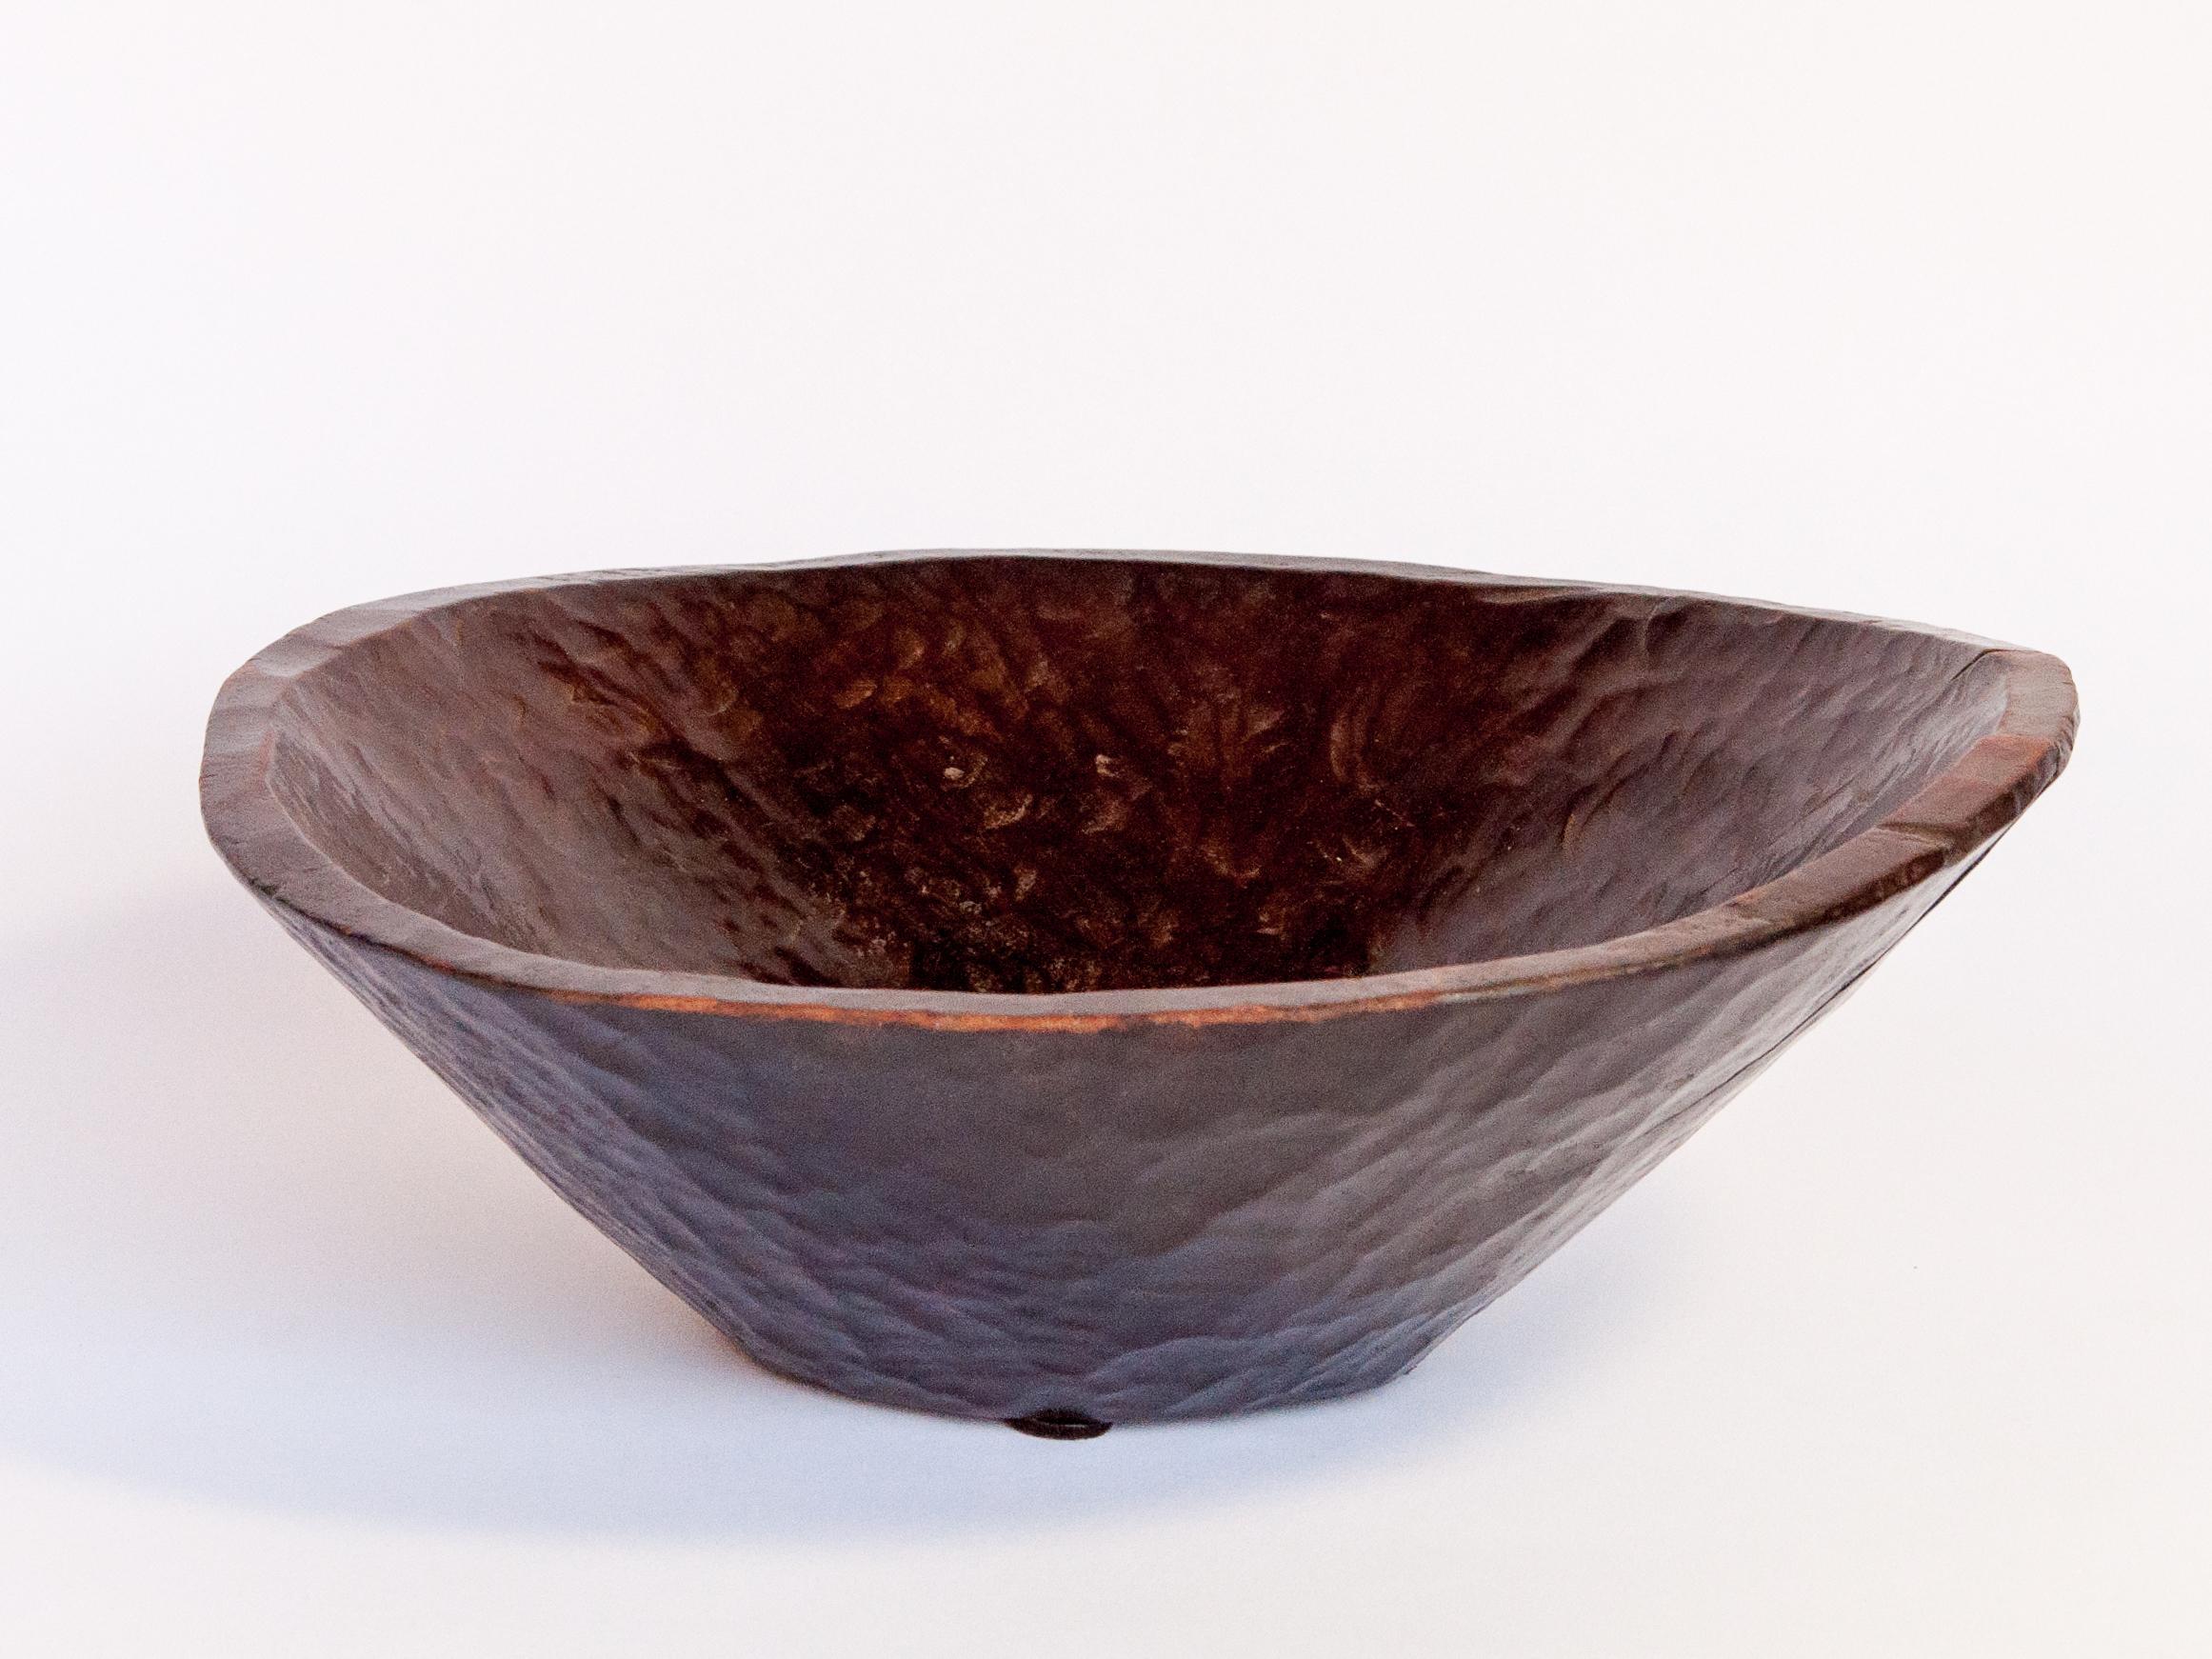 Vintage tribal wooden bowl from Ethiopia, mid-20th century.
What is noteworthy about this wooden bowl is its rich dark patina, a result of years of use, and its beautiful texture, a result of how it was shaped by hand, cutting and forming with an